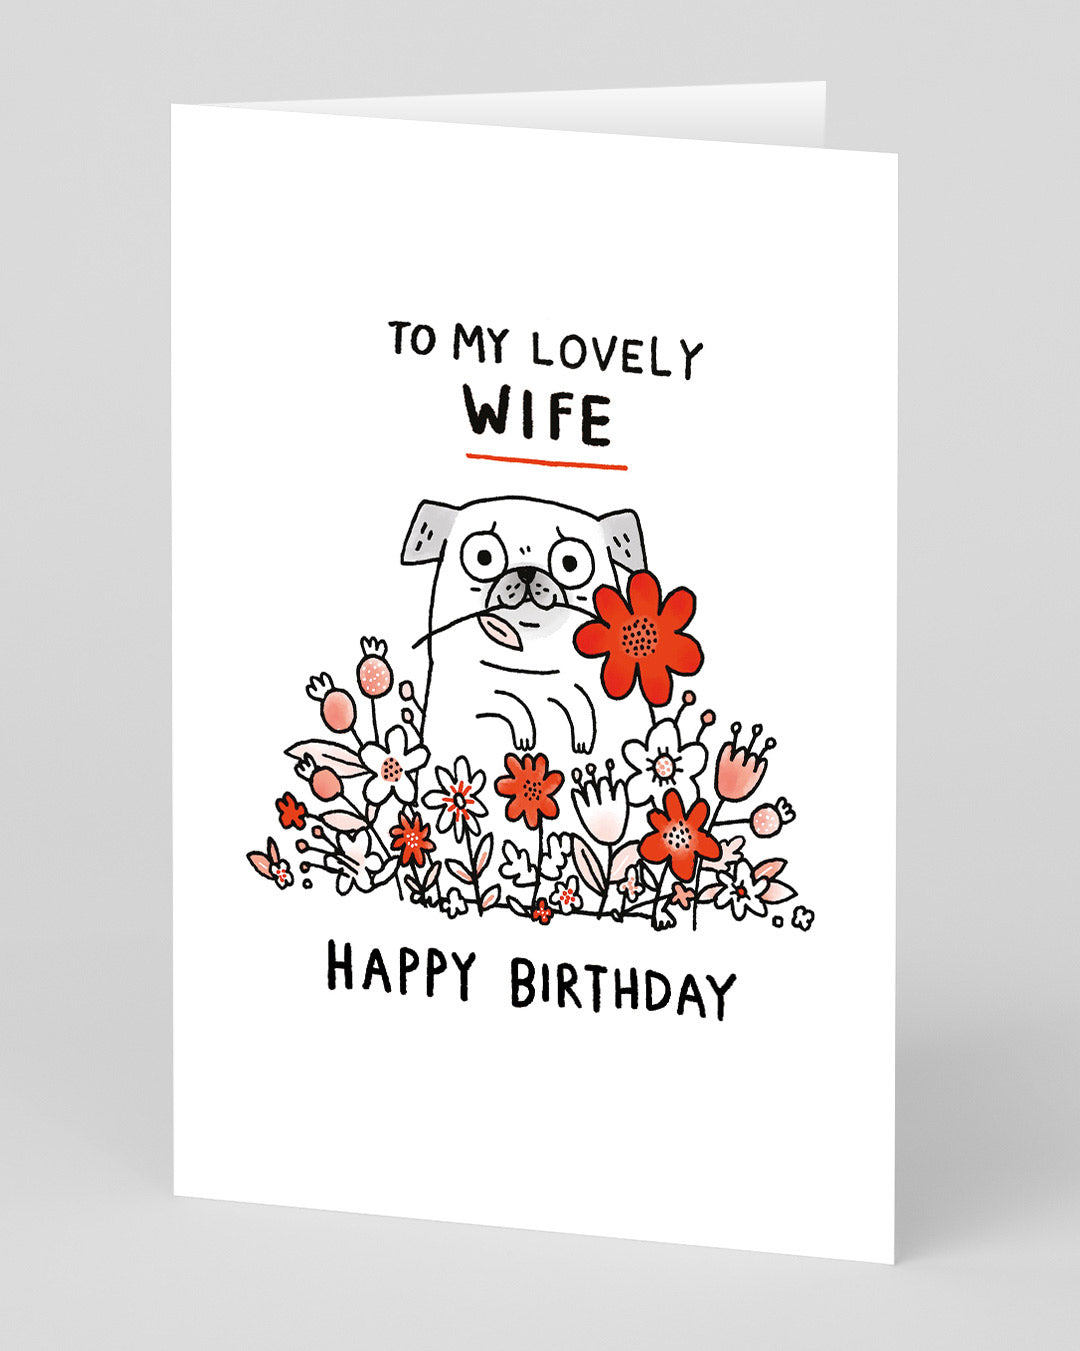 Personalised Gemma Correll Lovely Wife Pug Greeting Card